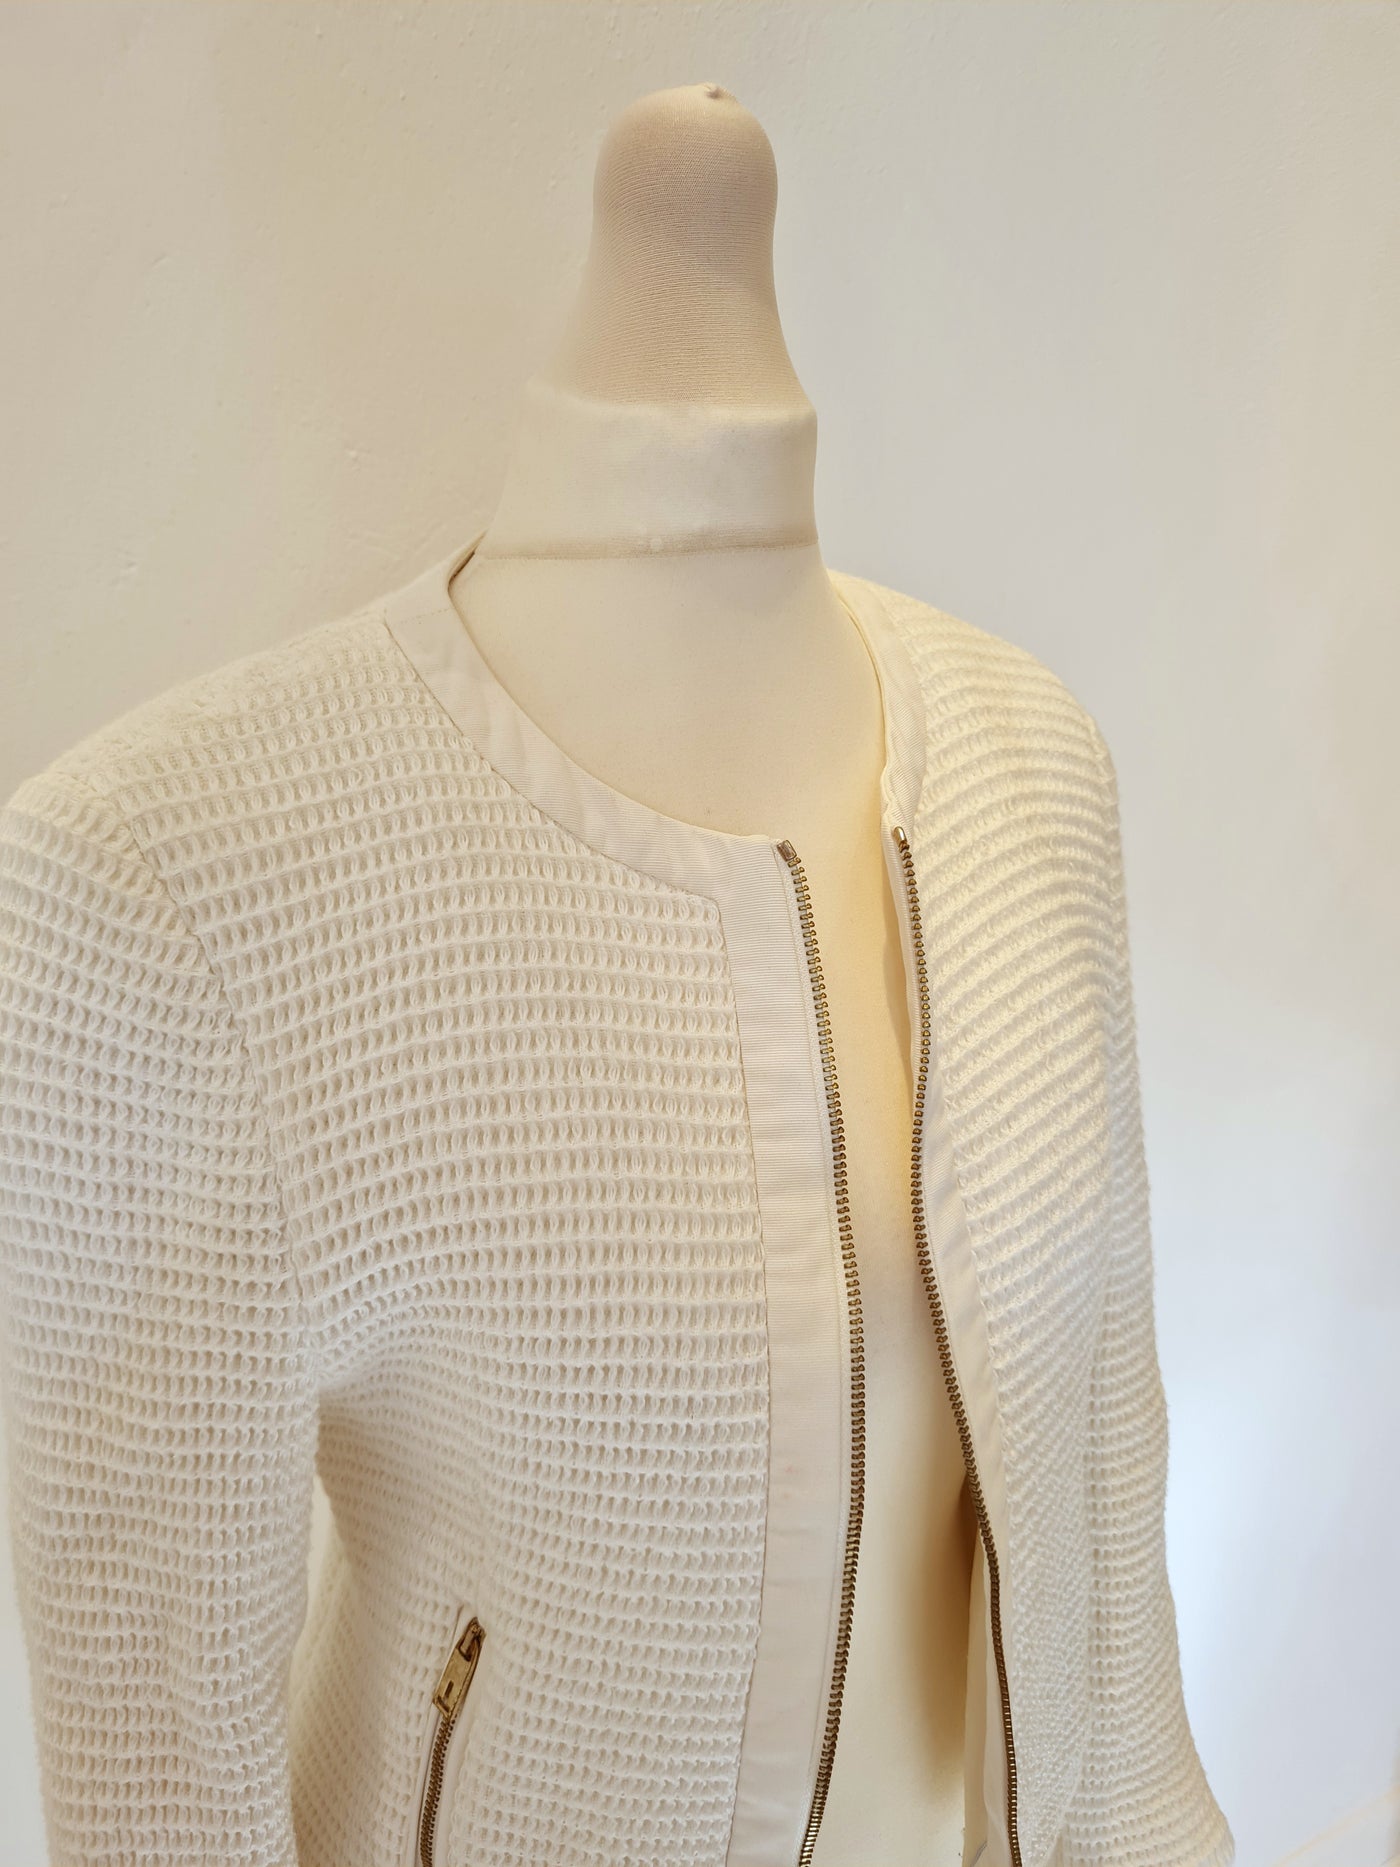 Ted Baker Cream Knit Crop Jacket Size 10